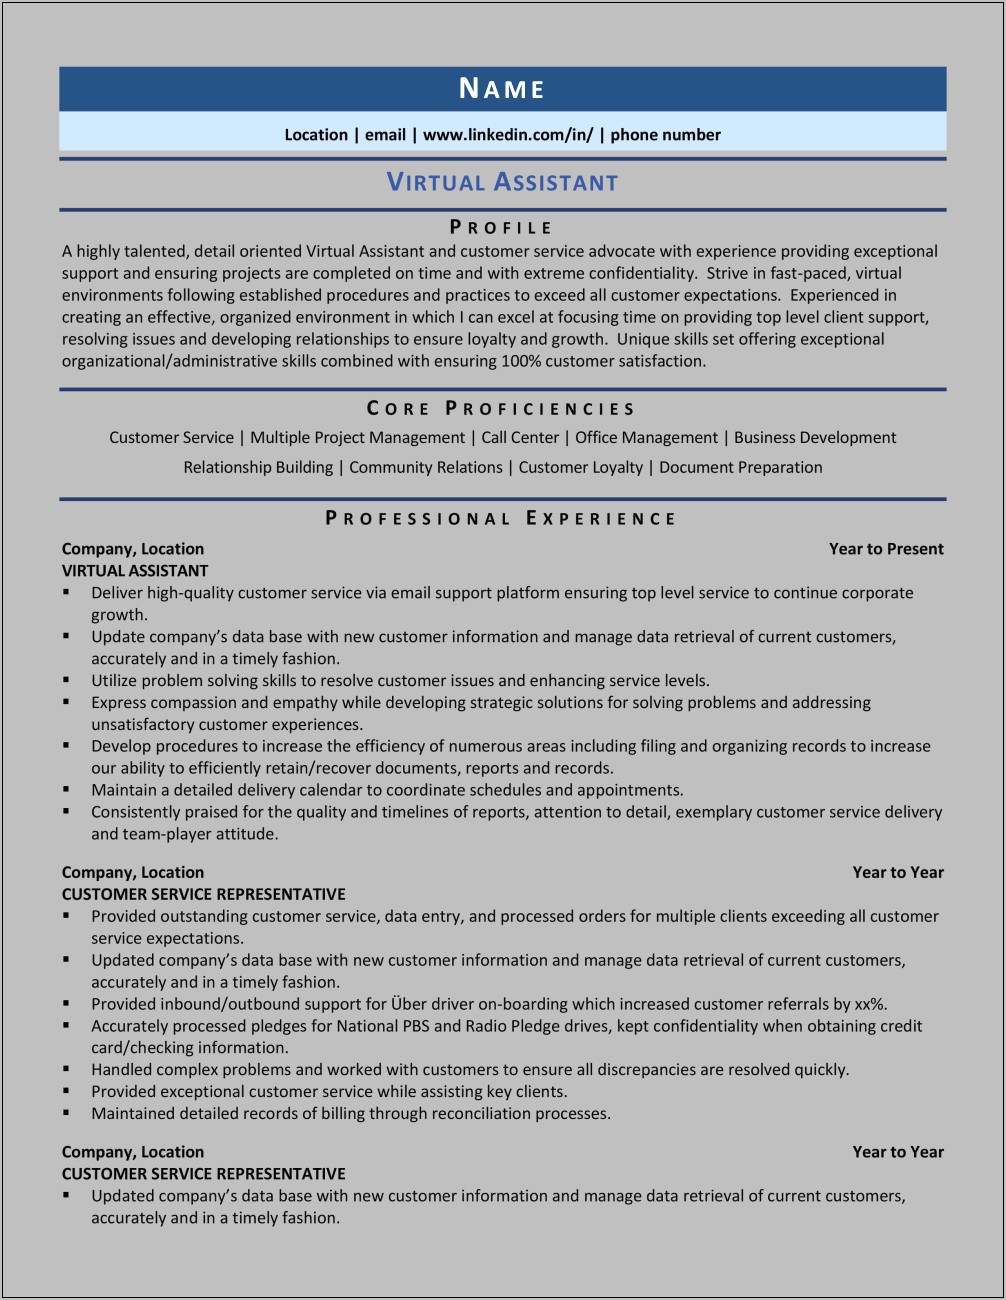 Personal Assistant Jobs Resume Objective